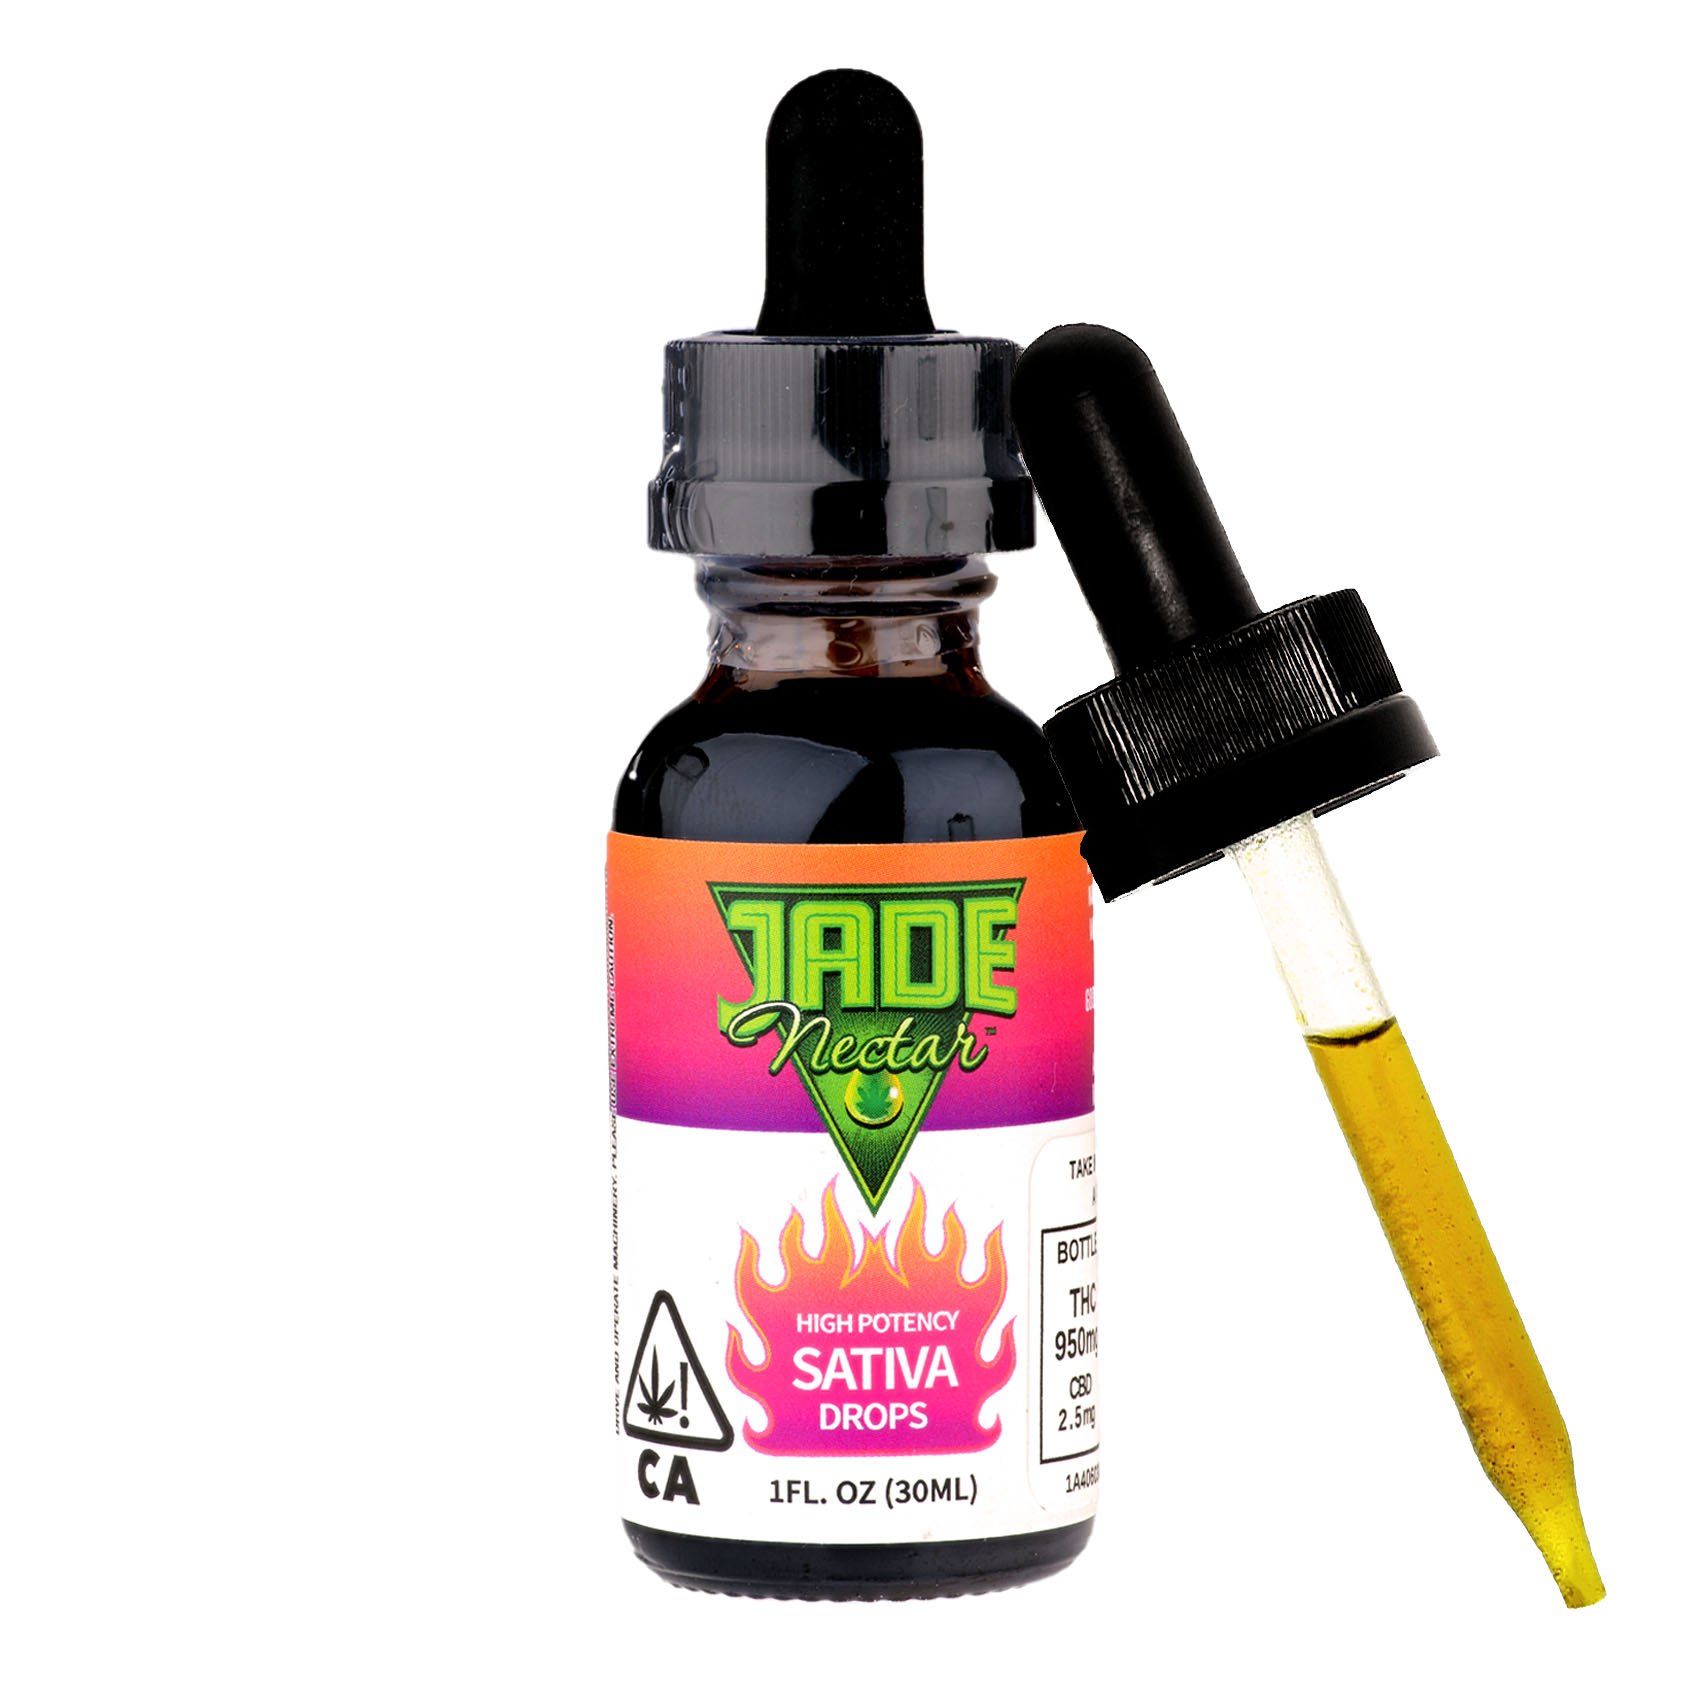 Jade Nectar High Potency Sativa Tincture is available at Berkeley Patients Group